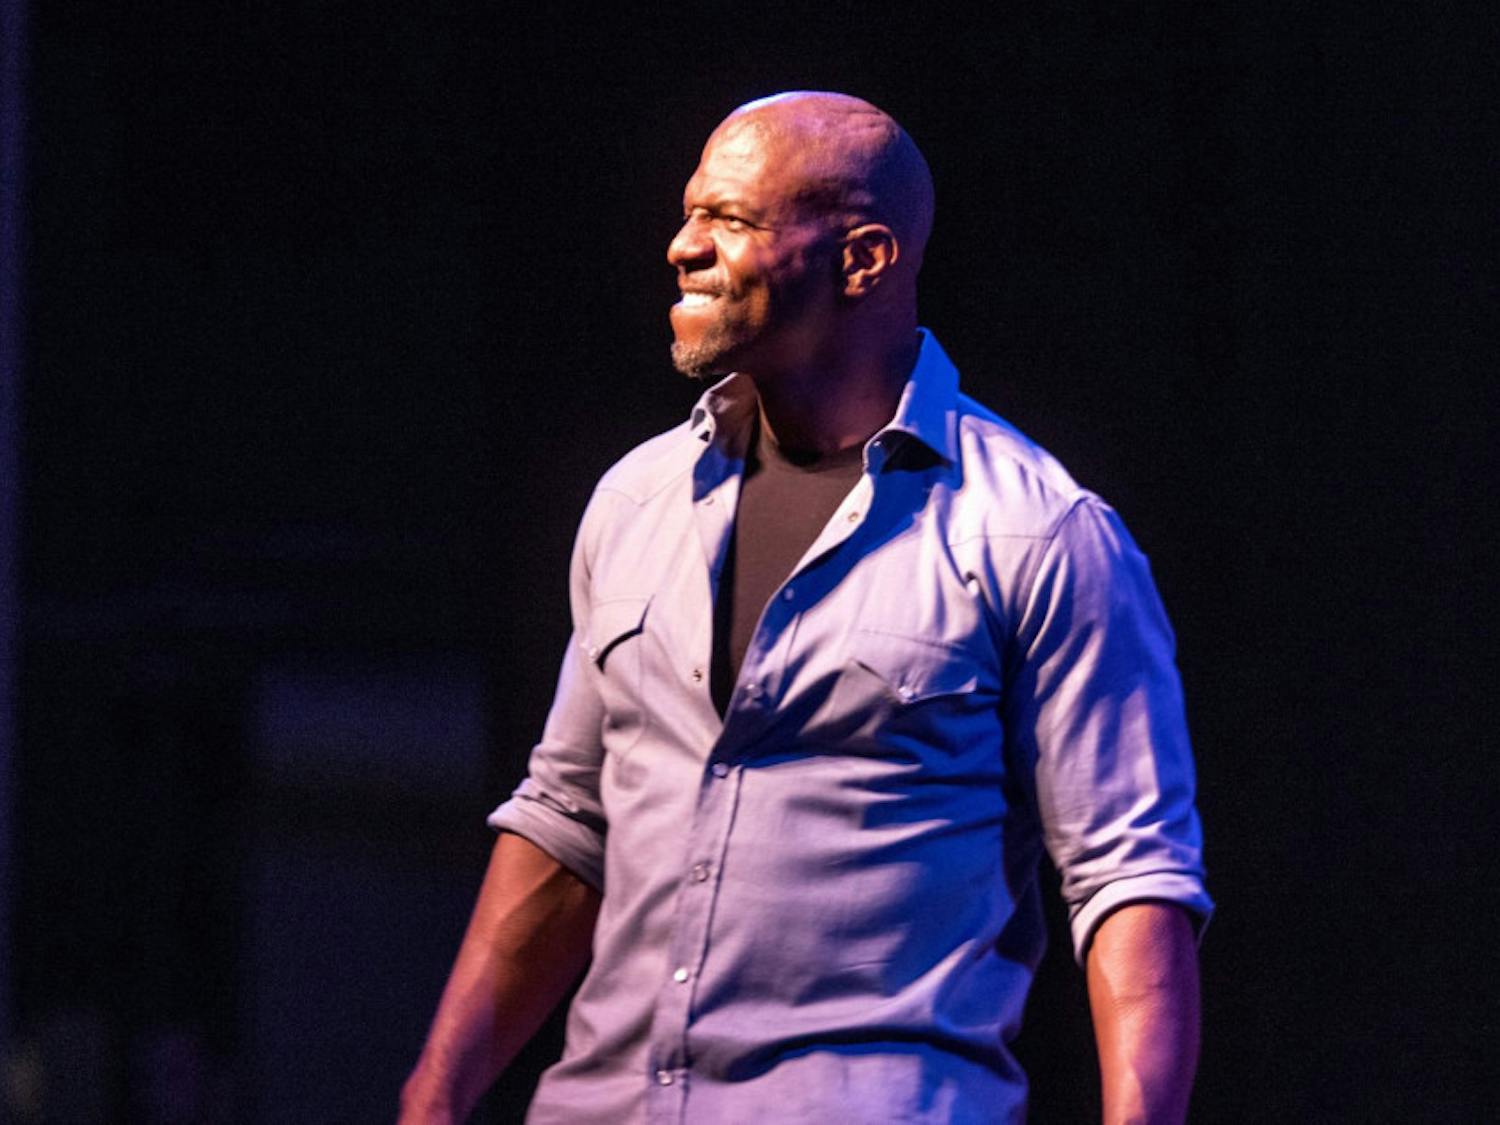 Terry Crews smiles for the crowd as he makes an enthusiastic entrance inside the Phillips Center for the Performing Arts on Tuesday night at the Accent Speakers Bureau-hosted event. Crews shared stories of rejection and perseverance along his journey of success.